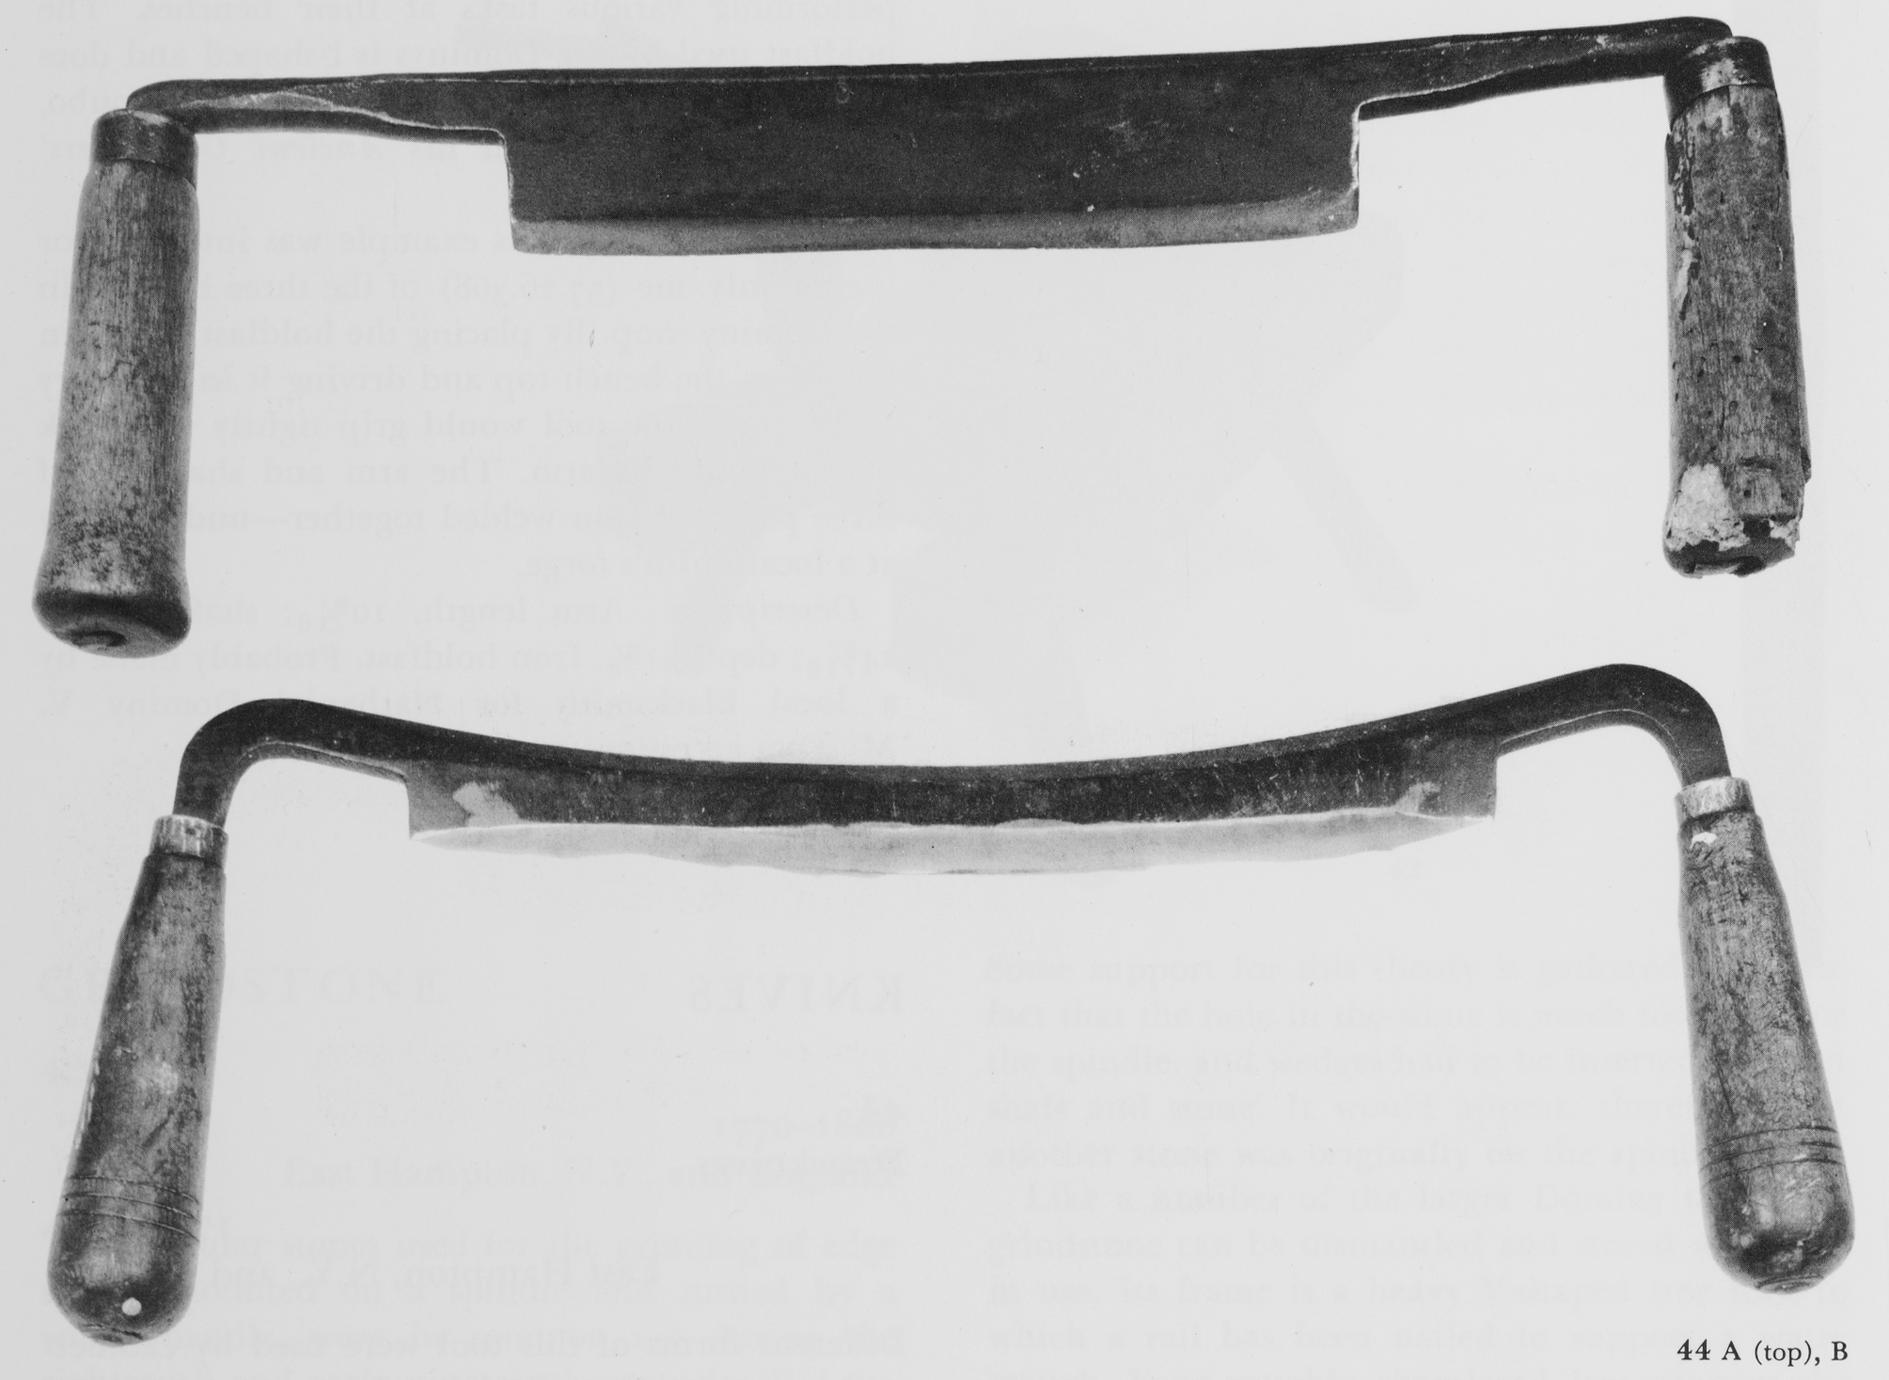 Example of two drawknives.